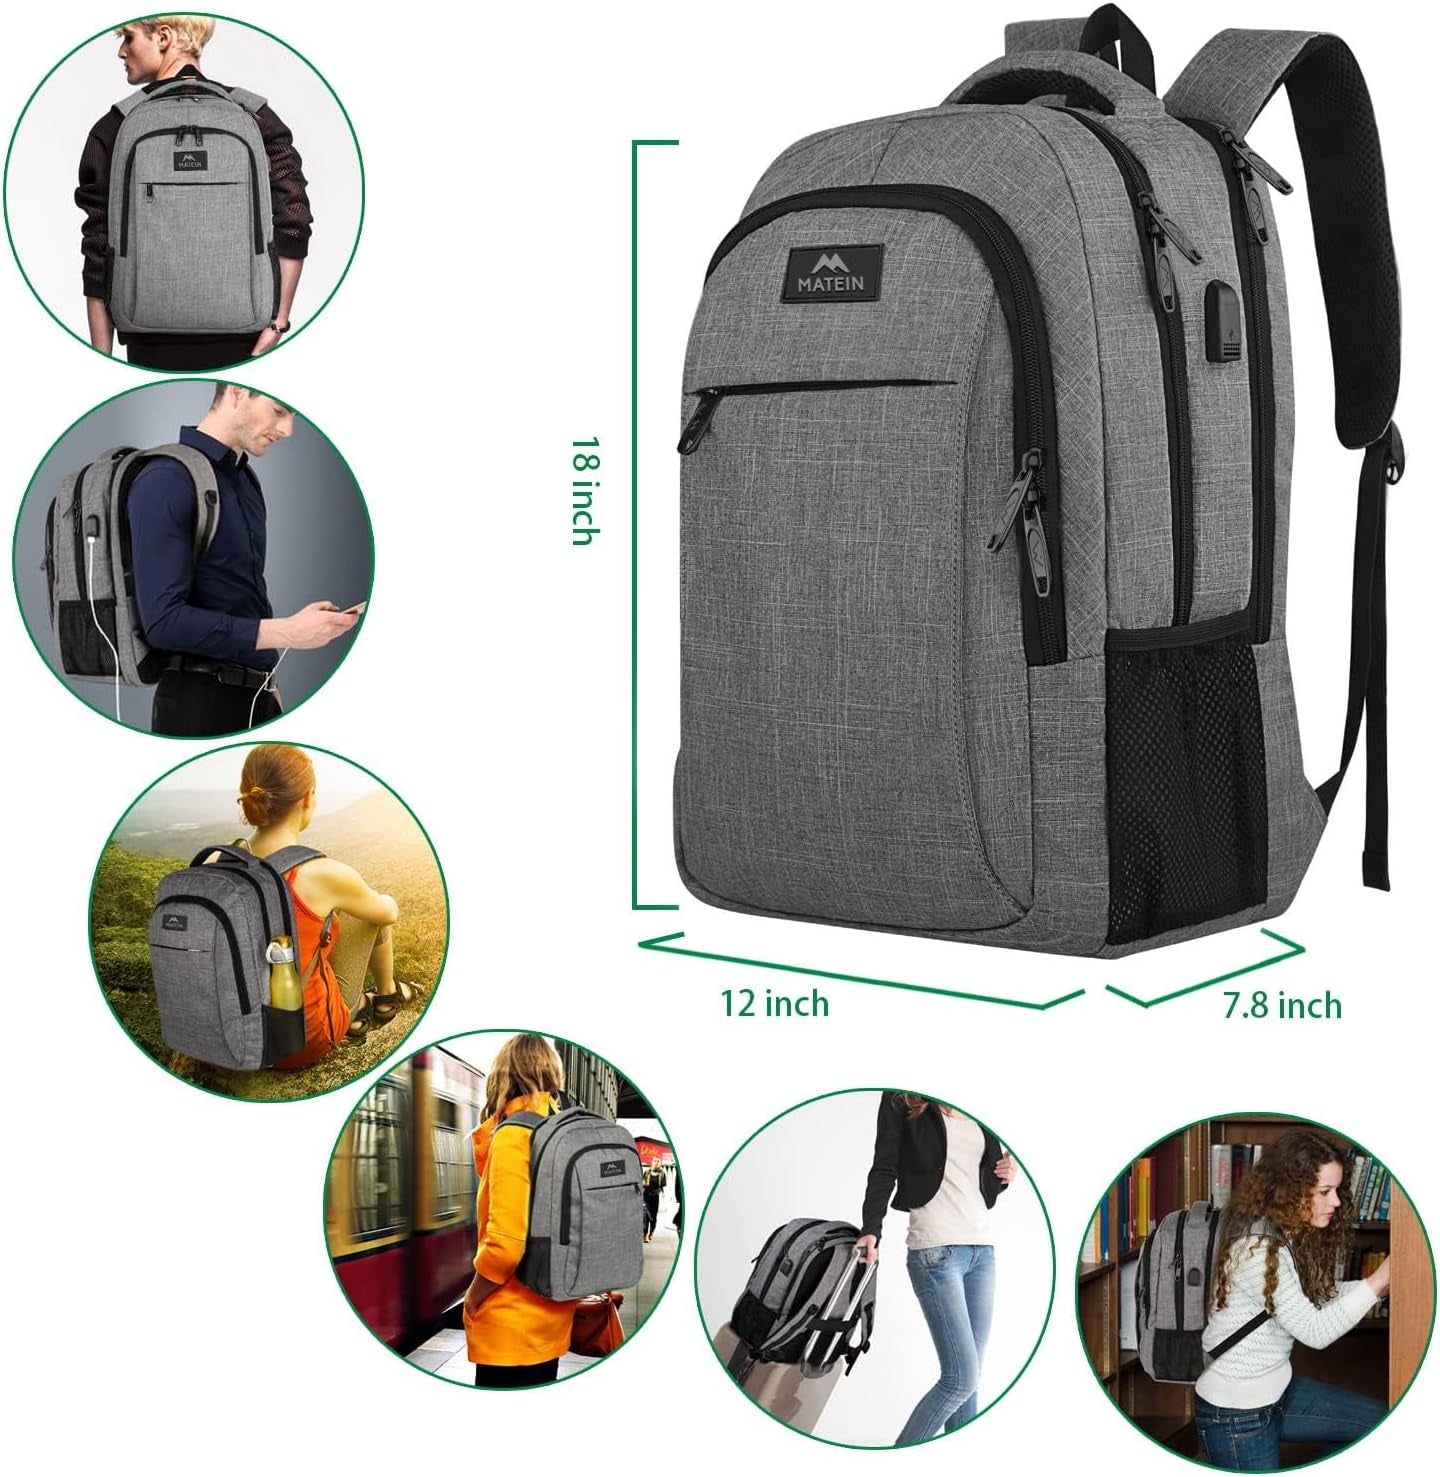 Travel Laptop Backpack, Business anti Theft Slim Sturdy Laptops Backpack with USB Charging Port, Water Resistant College School Computer Bag Gift for Men & Women Fits 15.6 Inch Notebook, Grey